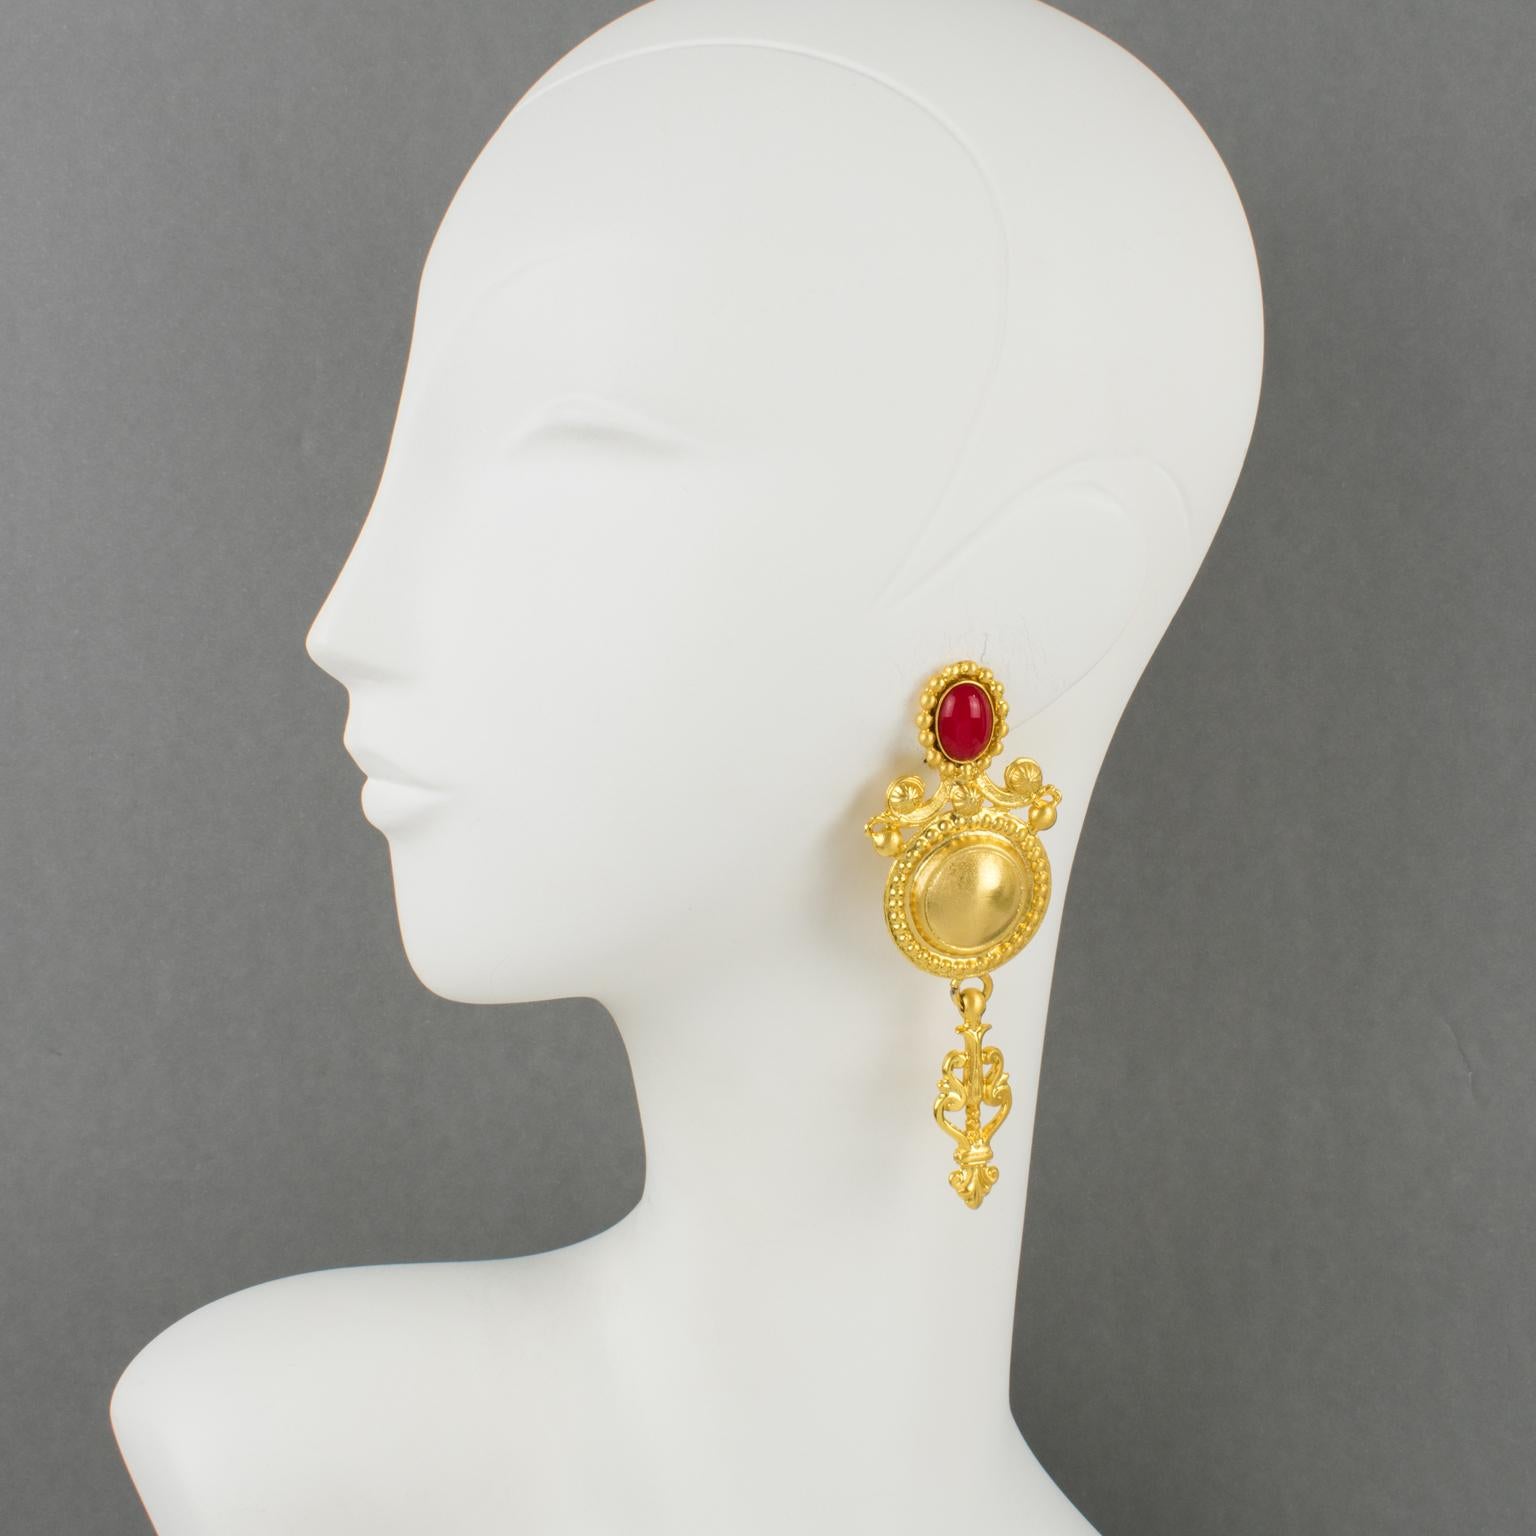 These stunning couture clip-on earrings were designed by Gianfranco Ferre and made in Italy. The statement design features a gilt metal baroque shape, a semi-mat finish aspect with lots of texture, and carving compliment with Gripoix red poured